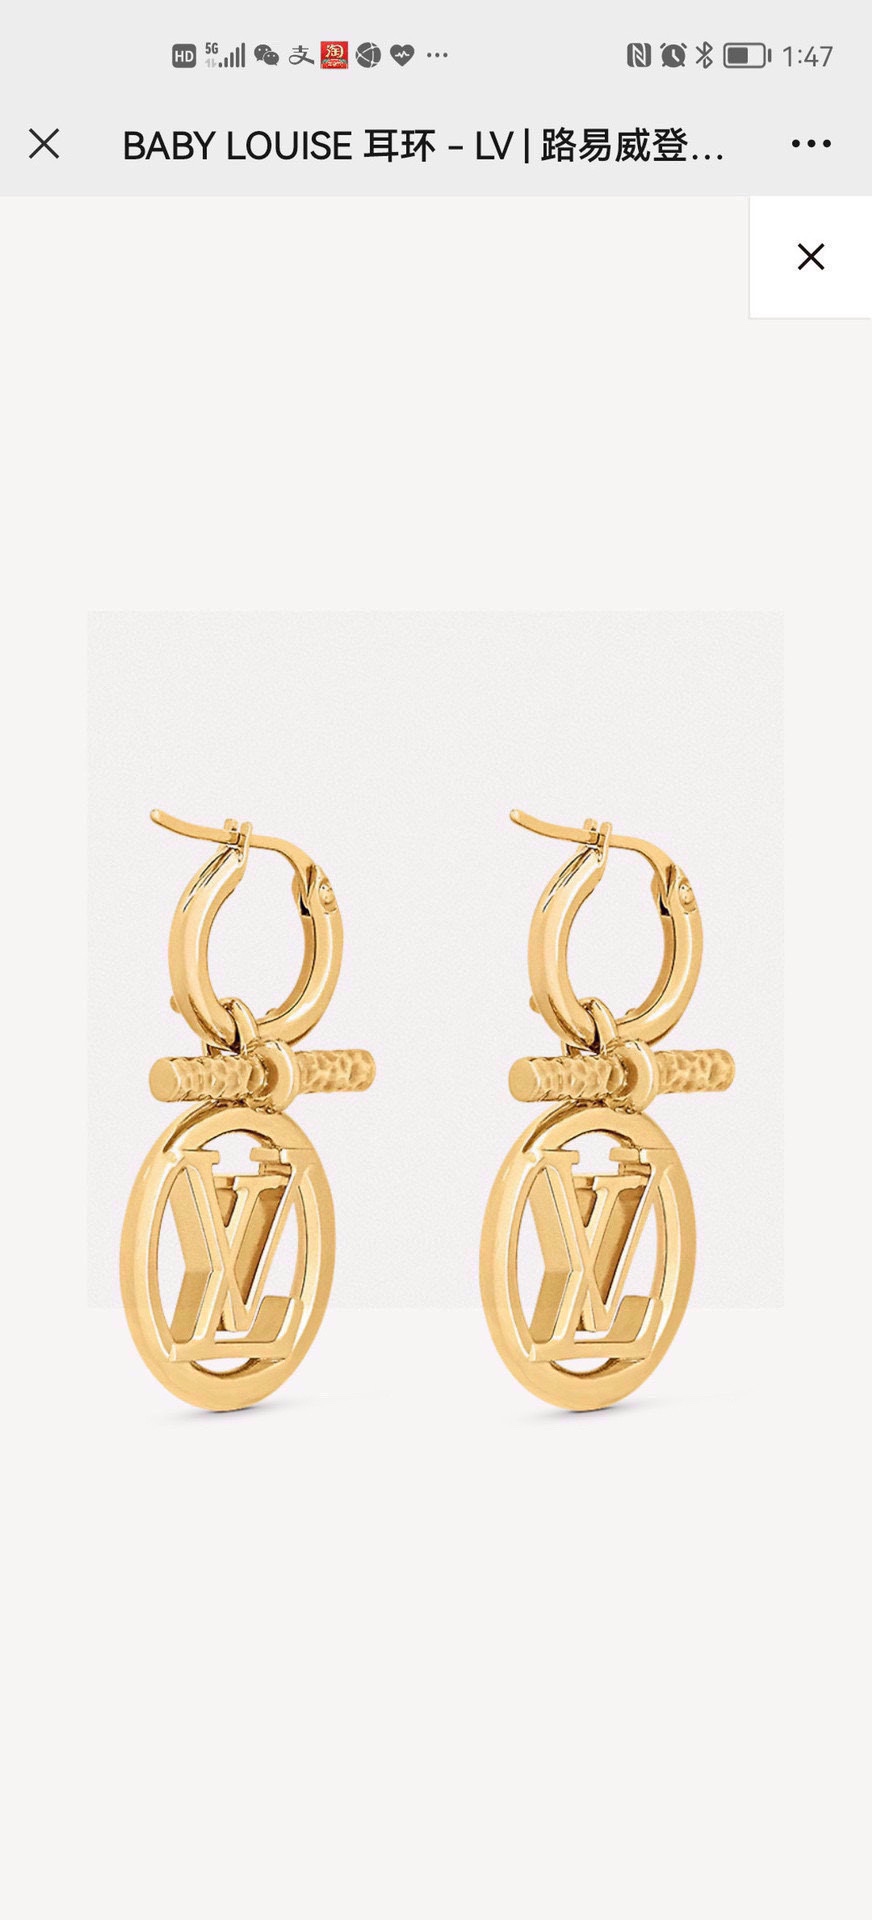 Louis Vuitton Jewelry Earring Necklaces & Pendants Polishing Chains